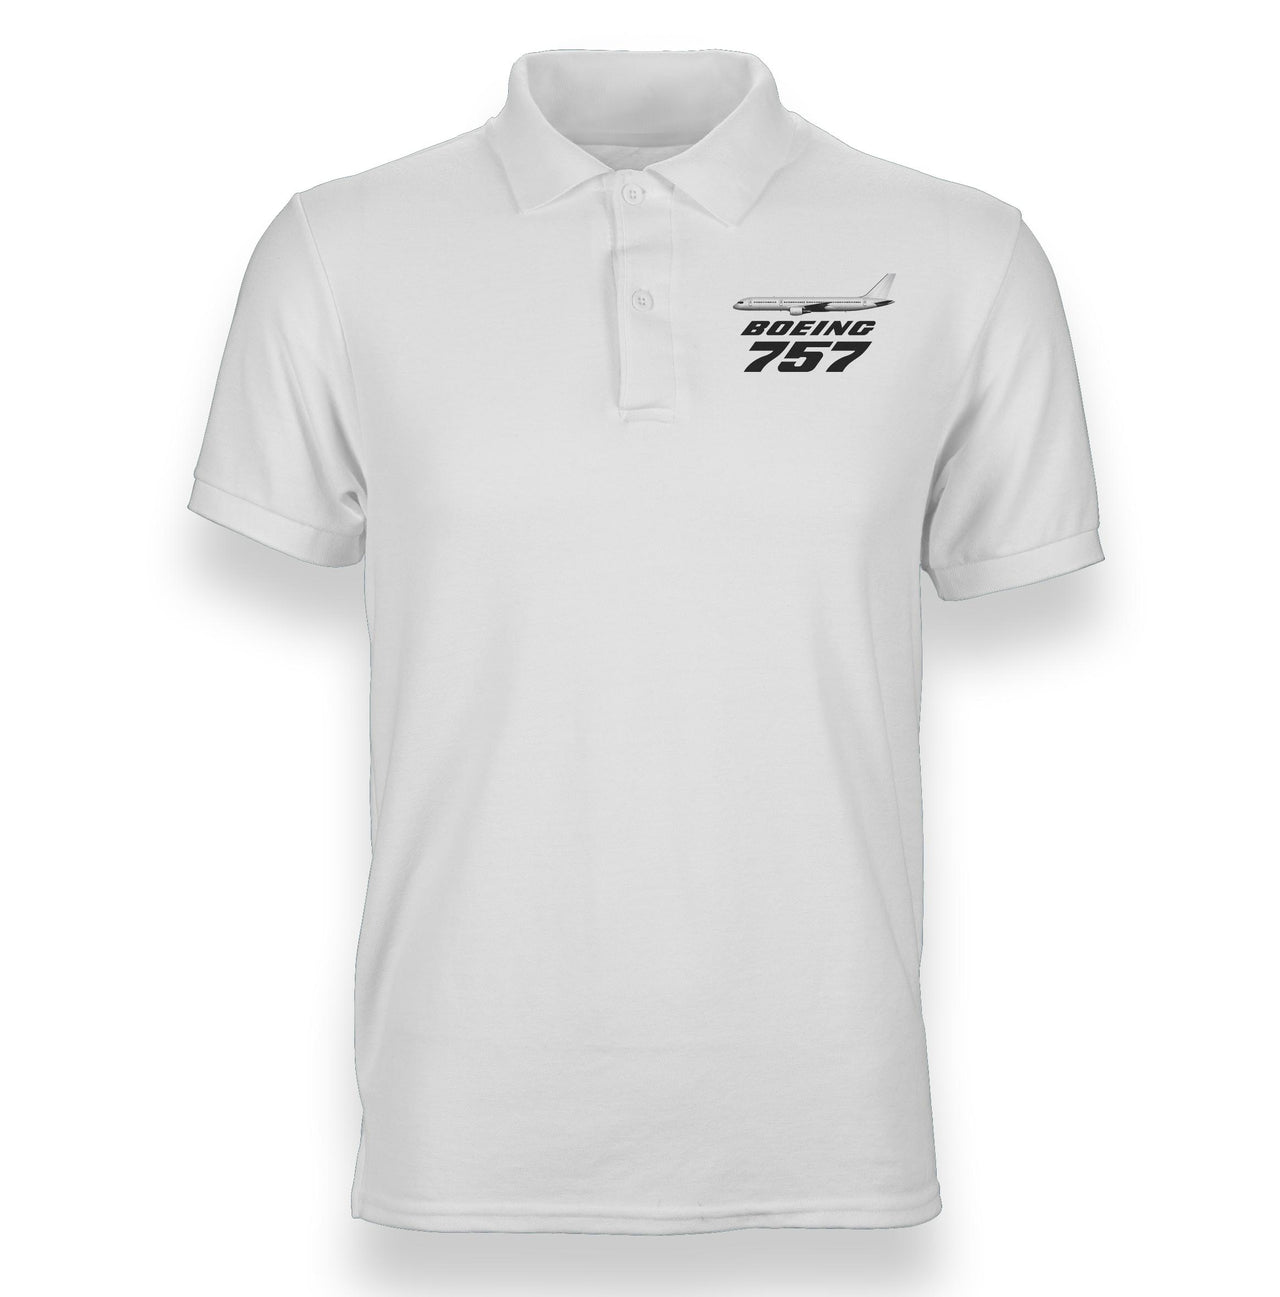 The Boeing 757 Designed Polo T-Shirts